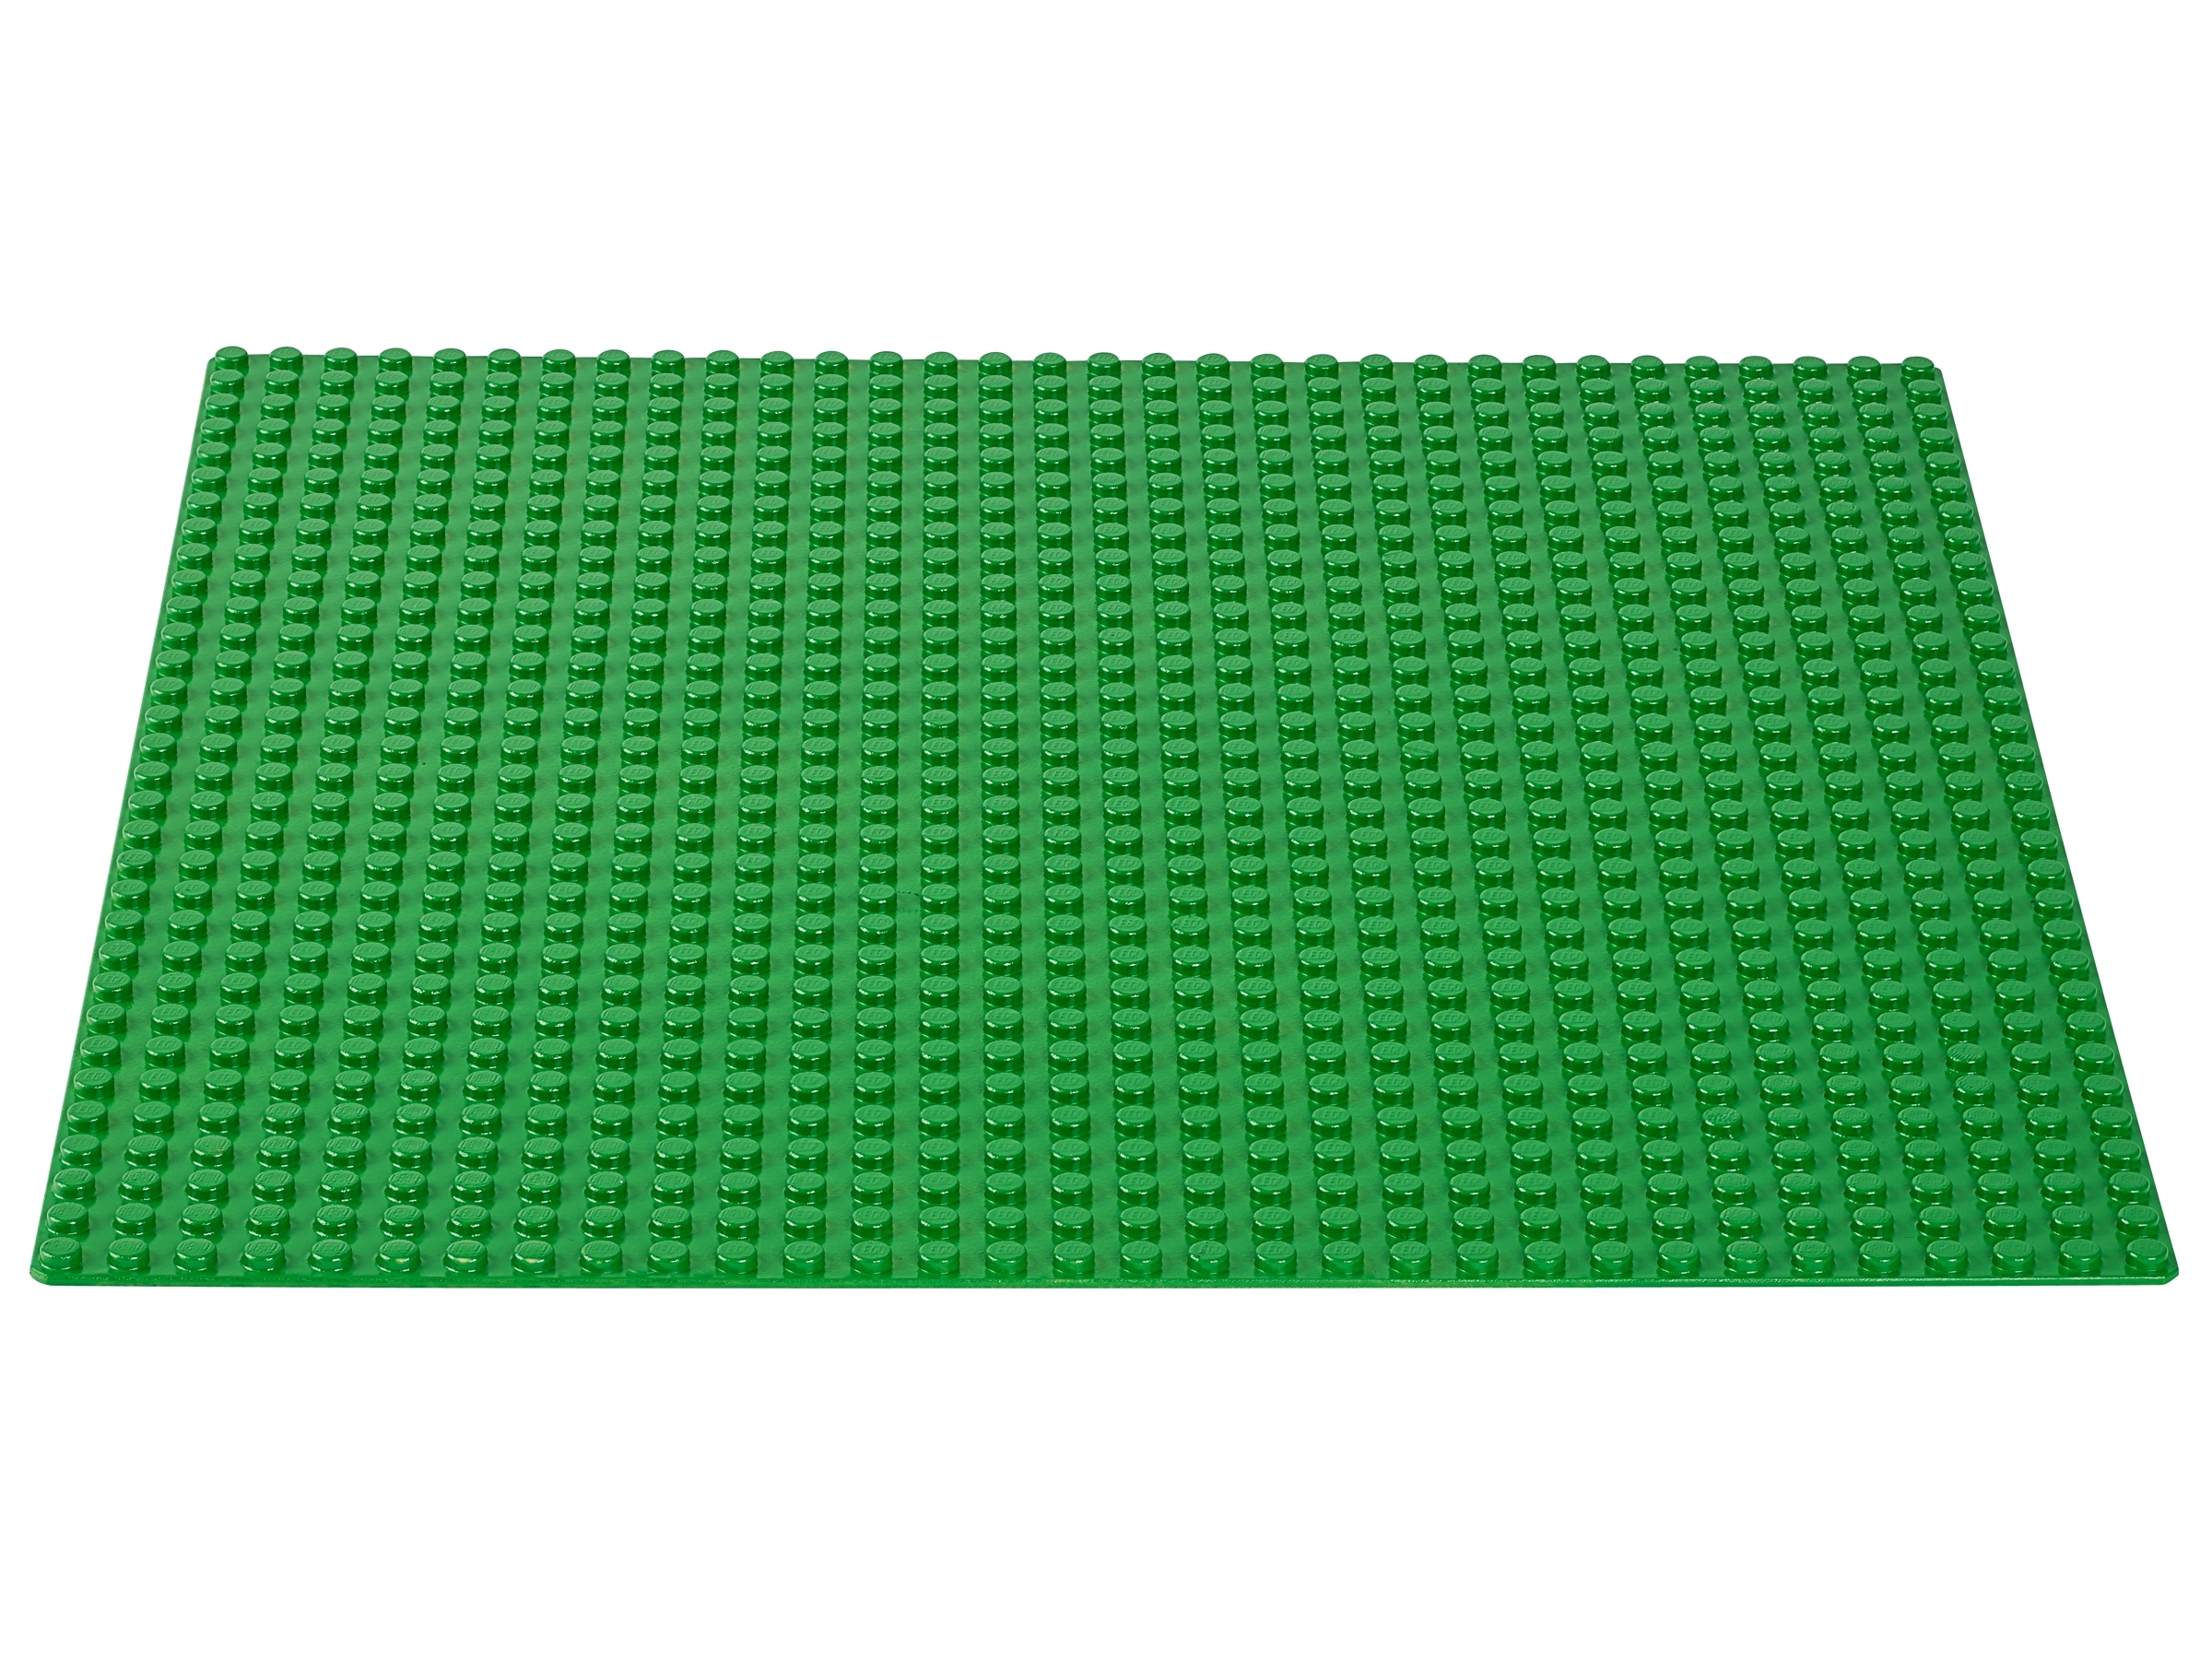 Lego Baseplate 32X32 Genuine Lego Bright Green Base Plate 10 inches by 10 inches 